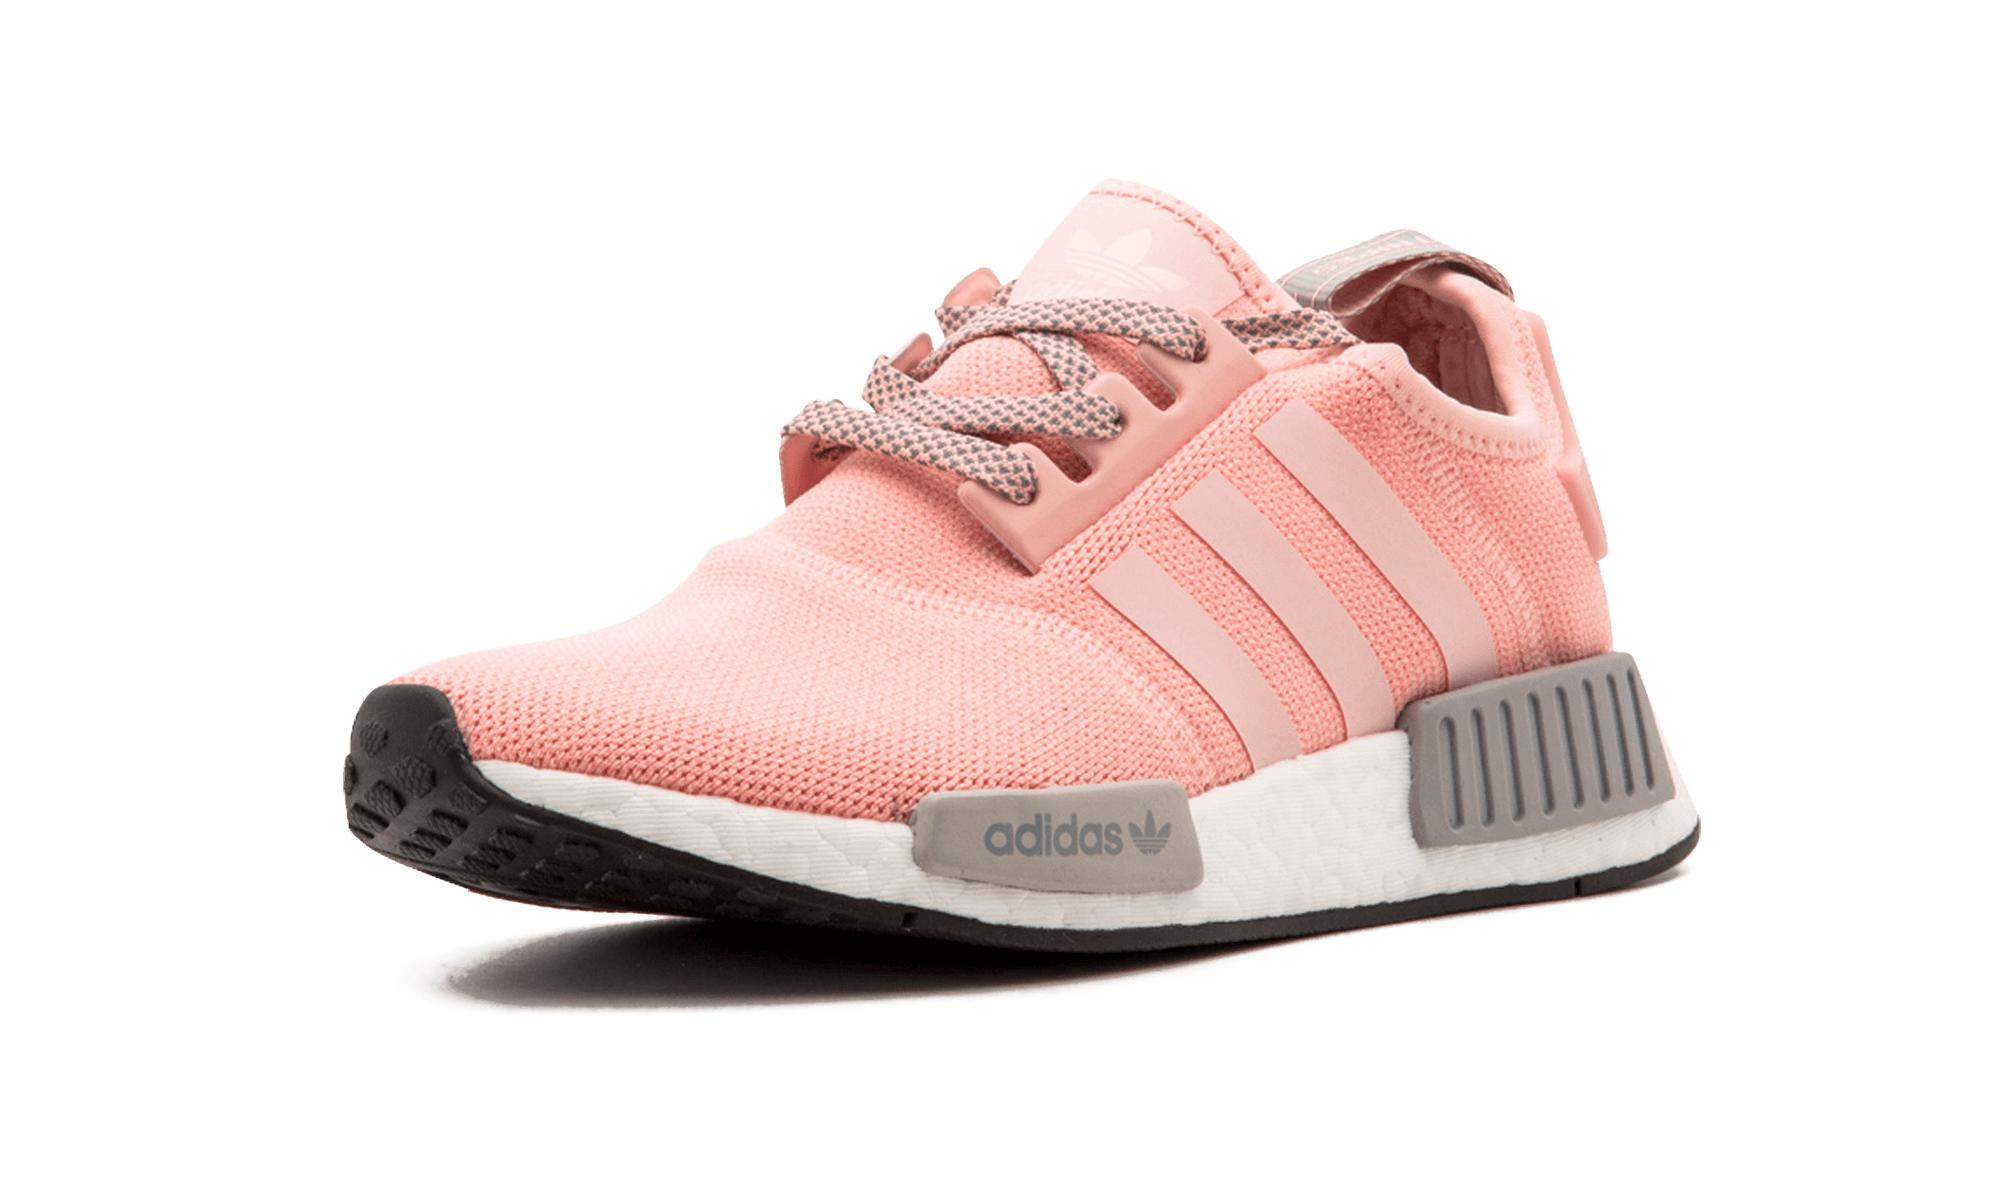 adidas nmd r1 red womens